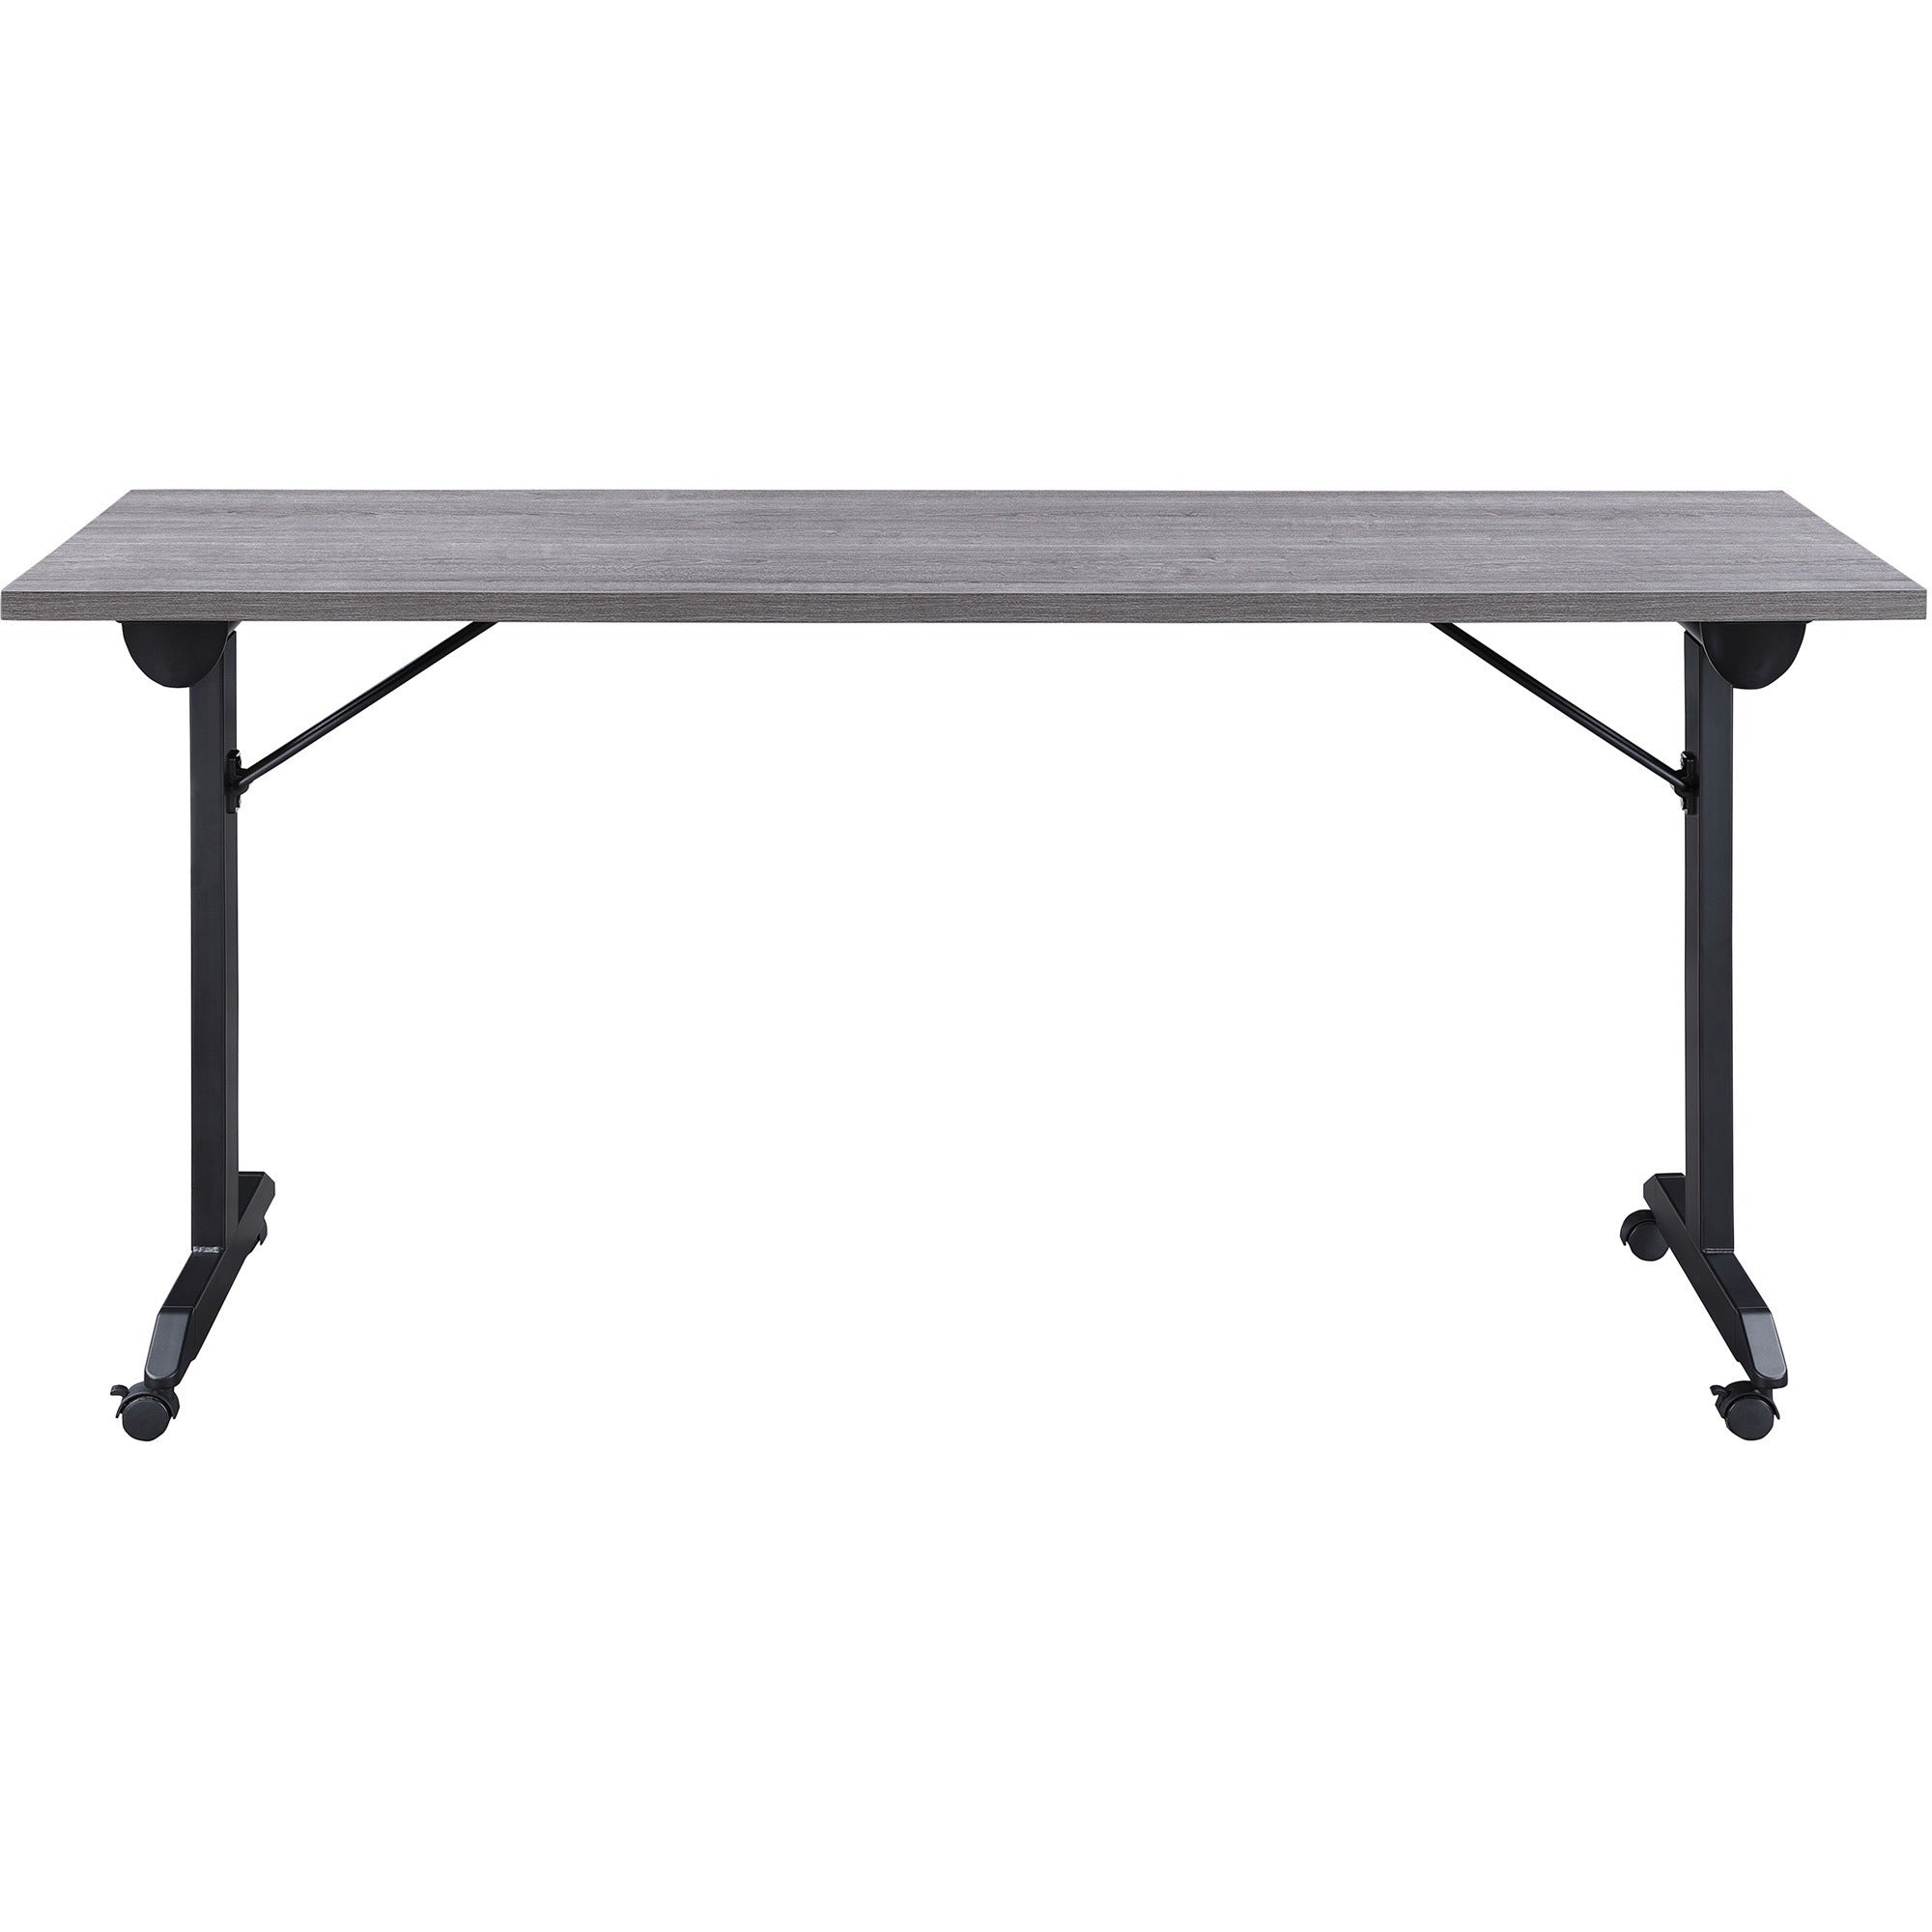 lorell-mobile-folding-training-table-for-table-toprectangle-top-powder-coated-base-200-lb-capacity-x-63-table-top-width-2950-height-x-63-width-x-24-depth-assembly-required-weathered-charcoal-1-each_llr60736 - 3